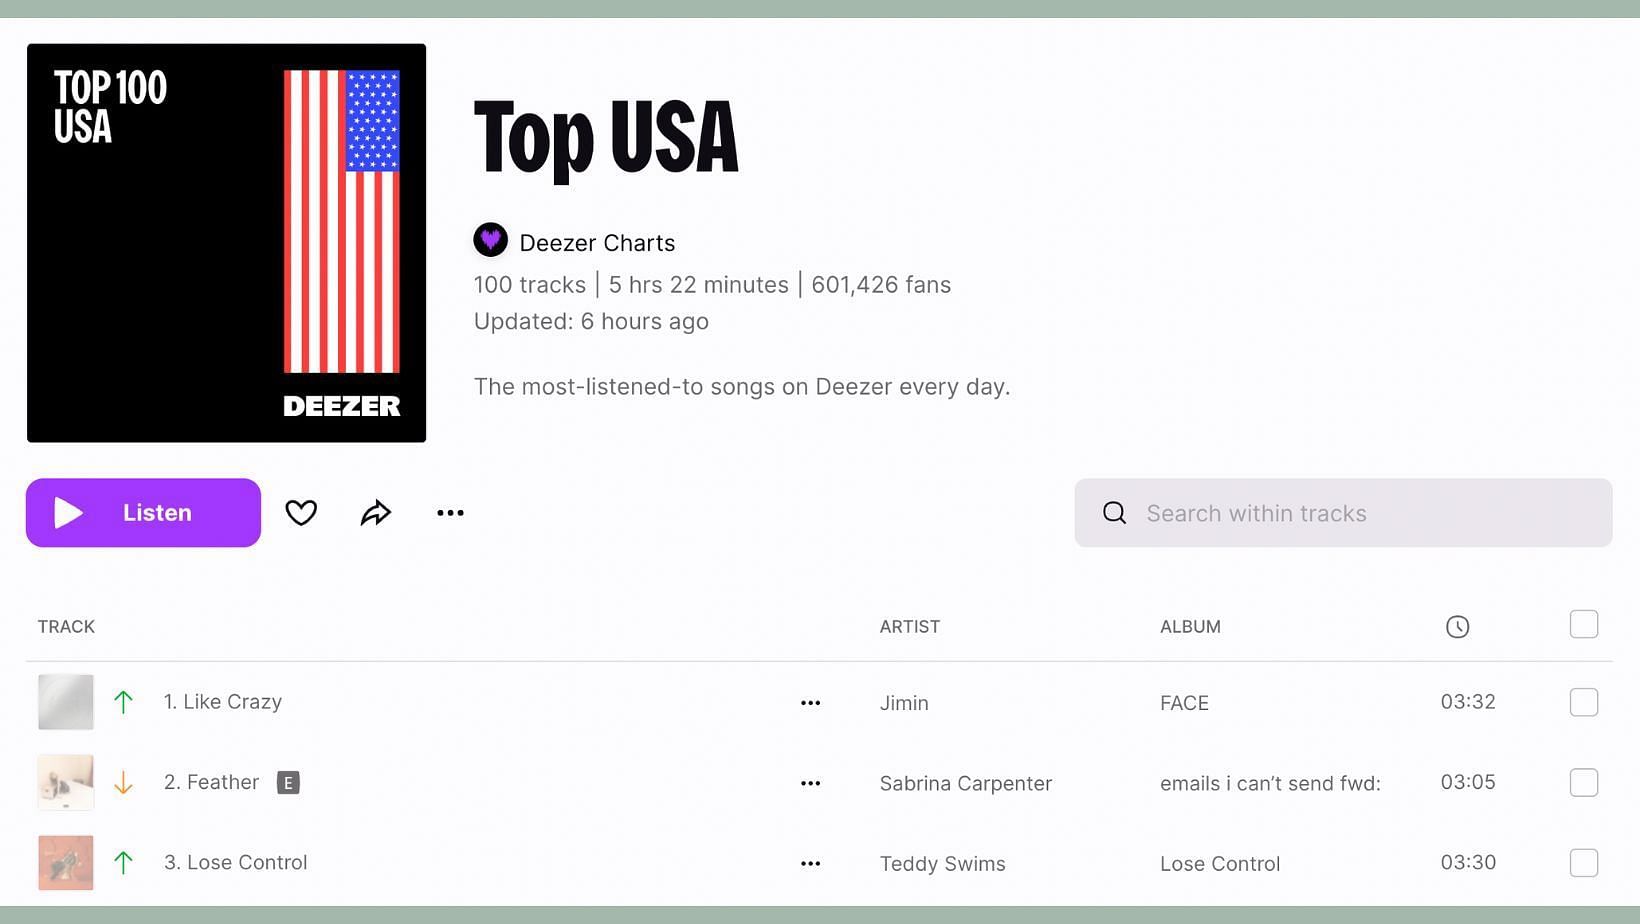 BTS&#039; Jimin&#039;s &#039;Like Crazy becomes the first and only solo song by a K-Pop act to reach #1 on the Deezer Top 100 USA chart history. (Image via DEEZER)